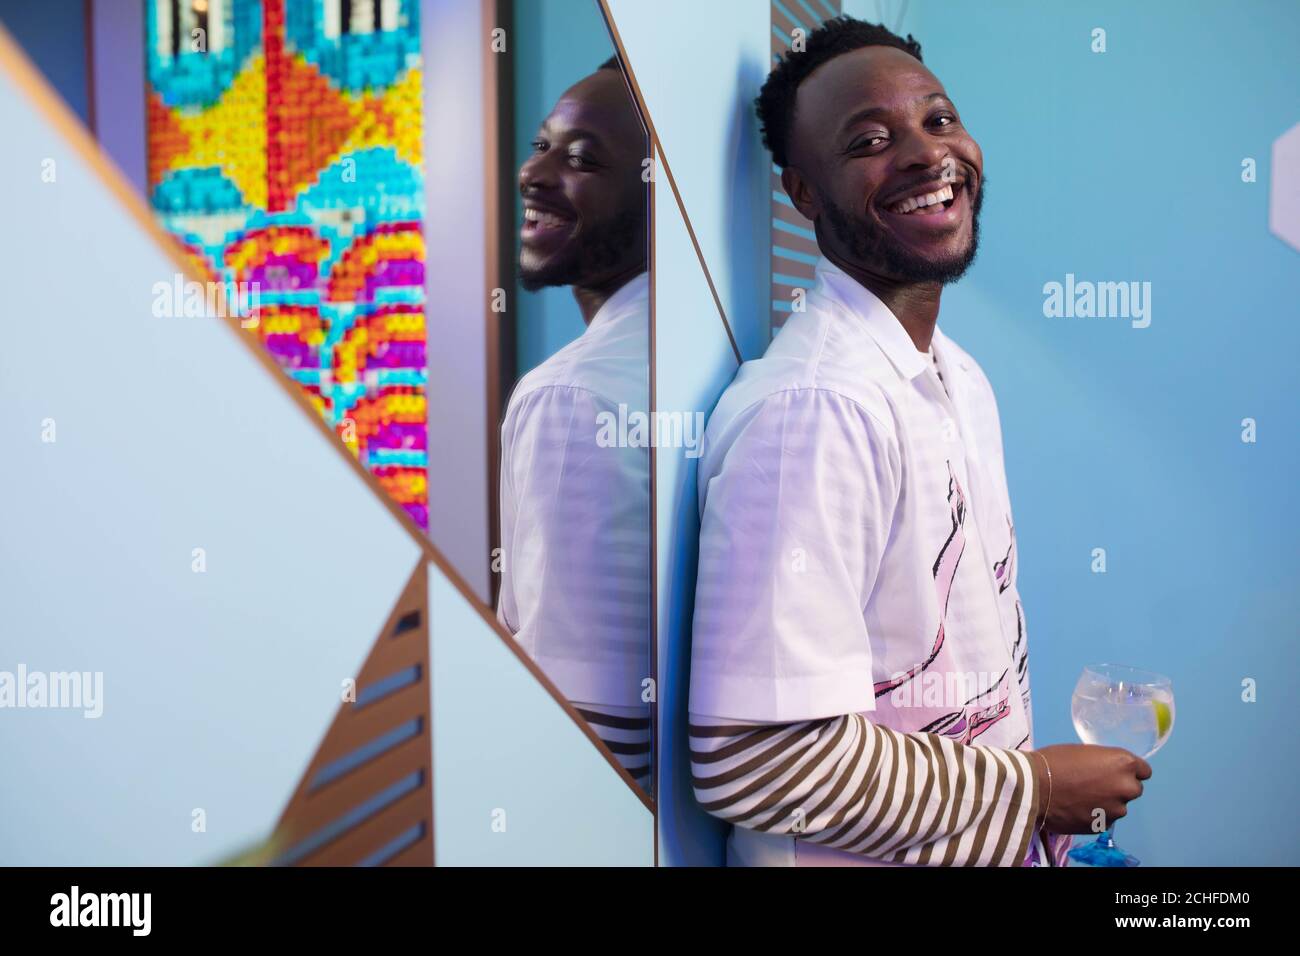 EDITORIAL USE ONLY Yinka Ilori with his artwork at the Bombay Sapphire Stir Creativity Lounge at Frieze London, where the gin brand is launching a new Artificial Intelligence art collection in collaboration with artist Yinka Ilori. Stock Photo